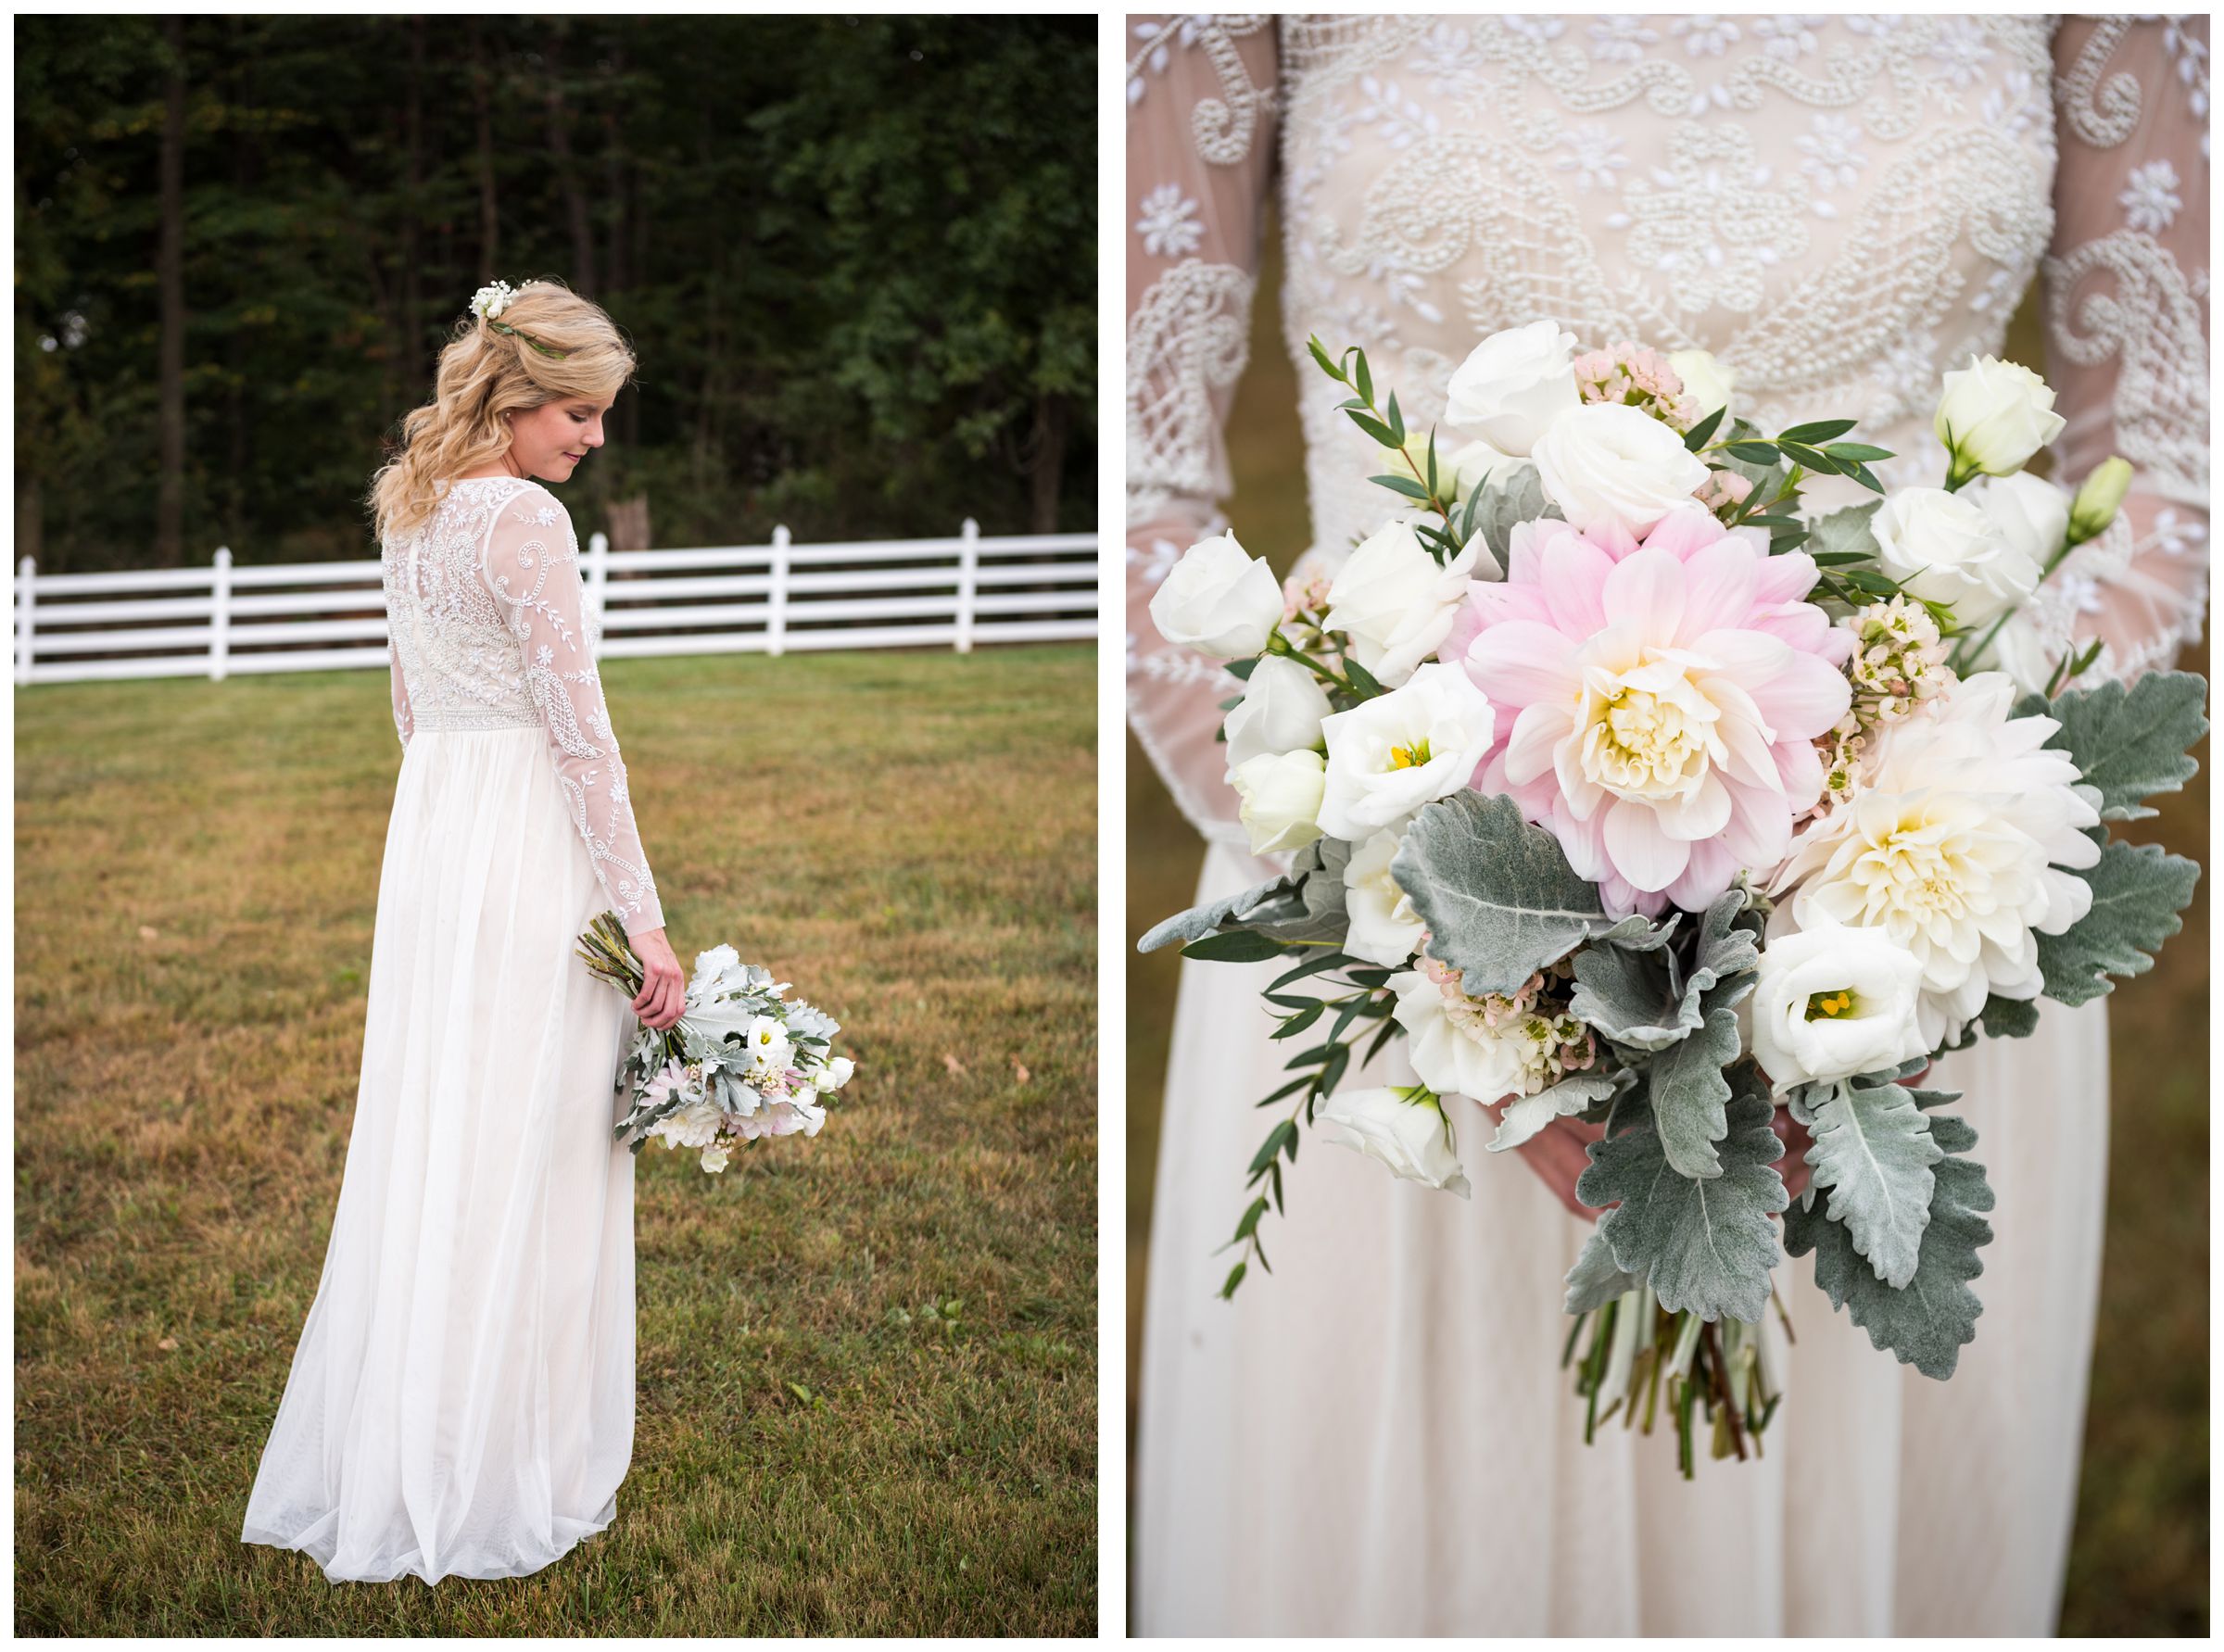 LGBTQ bride with lace sleeve gown and white and blush pink bouquet with greenery